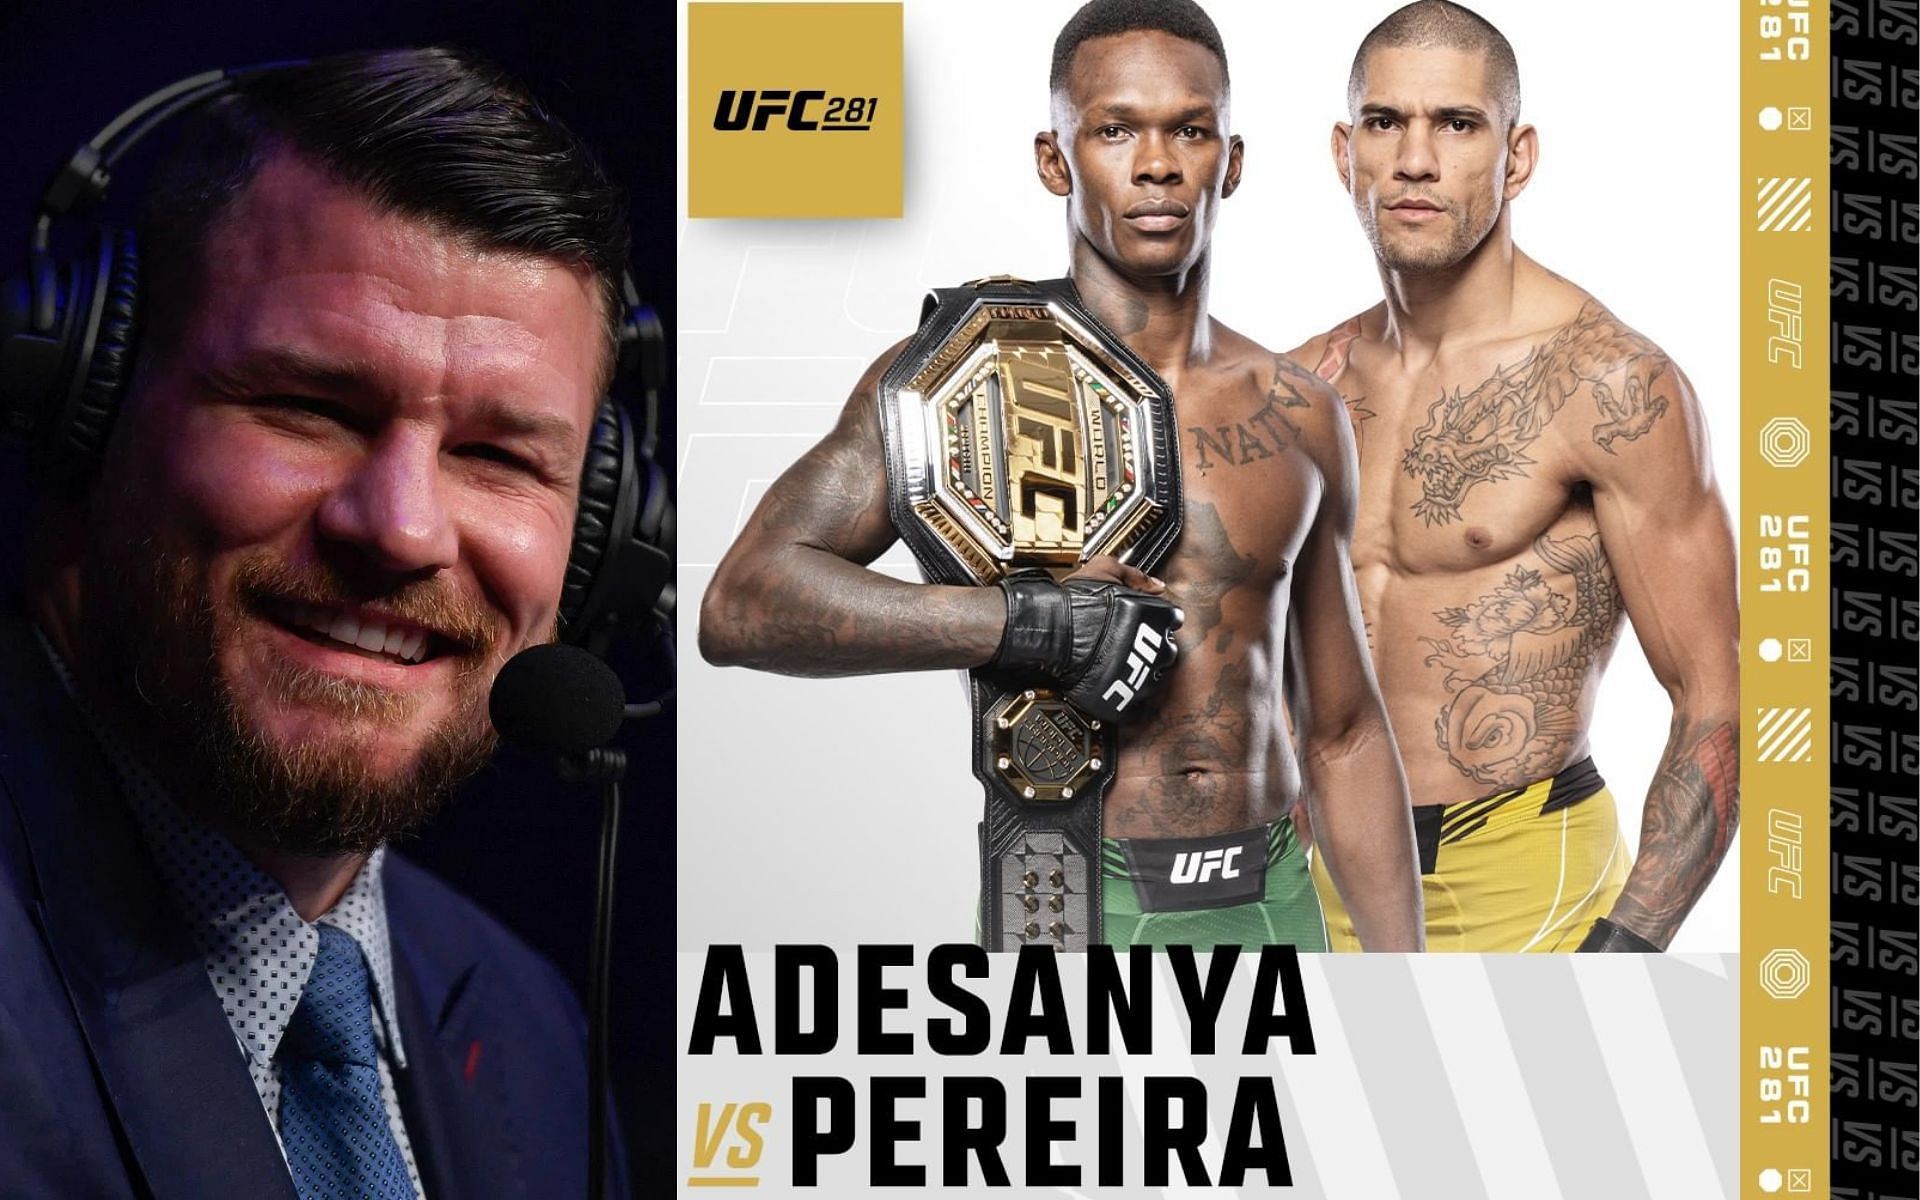 Michael Bisping (Left) and Israel Adesanya vs. Alex Pereira poster (Right) (Images courtesy of Getty and @ufc Instagram)